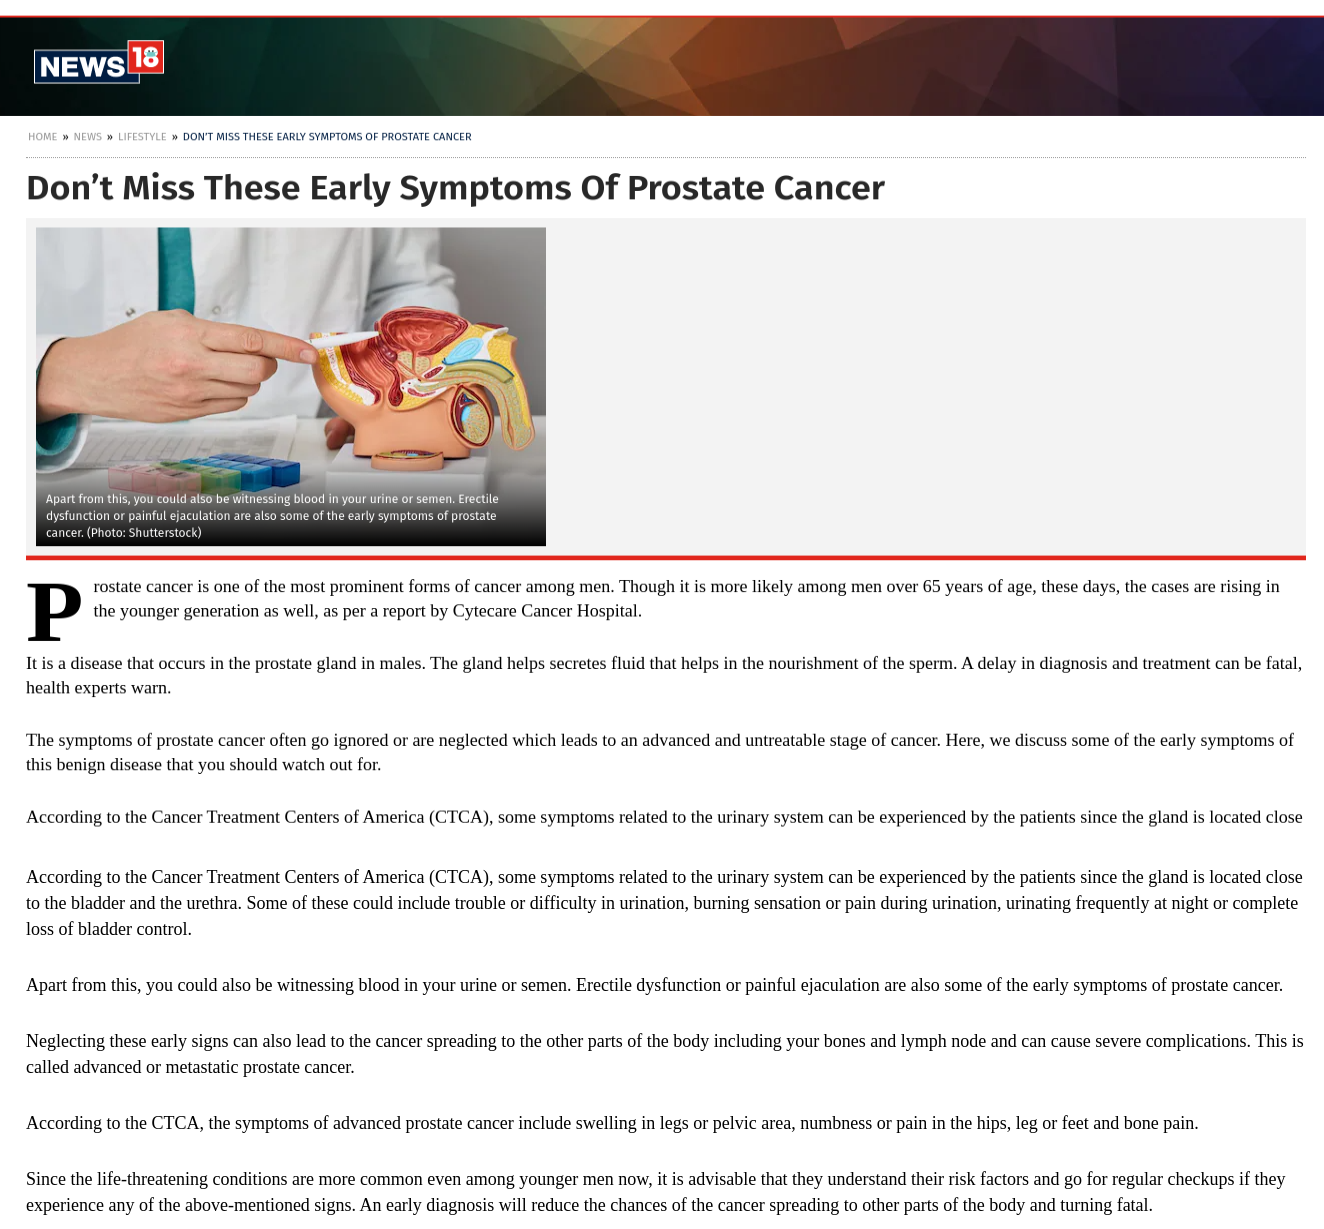 Don’t Miss These Early Symptoms Of Prostate Cancer